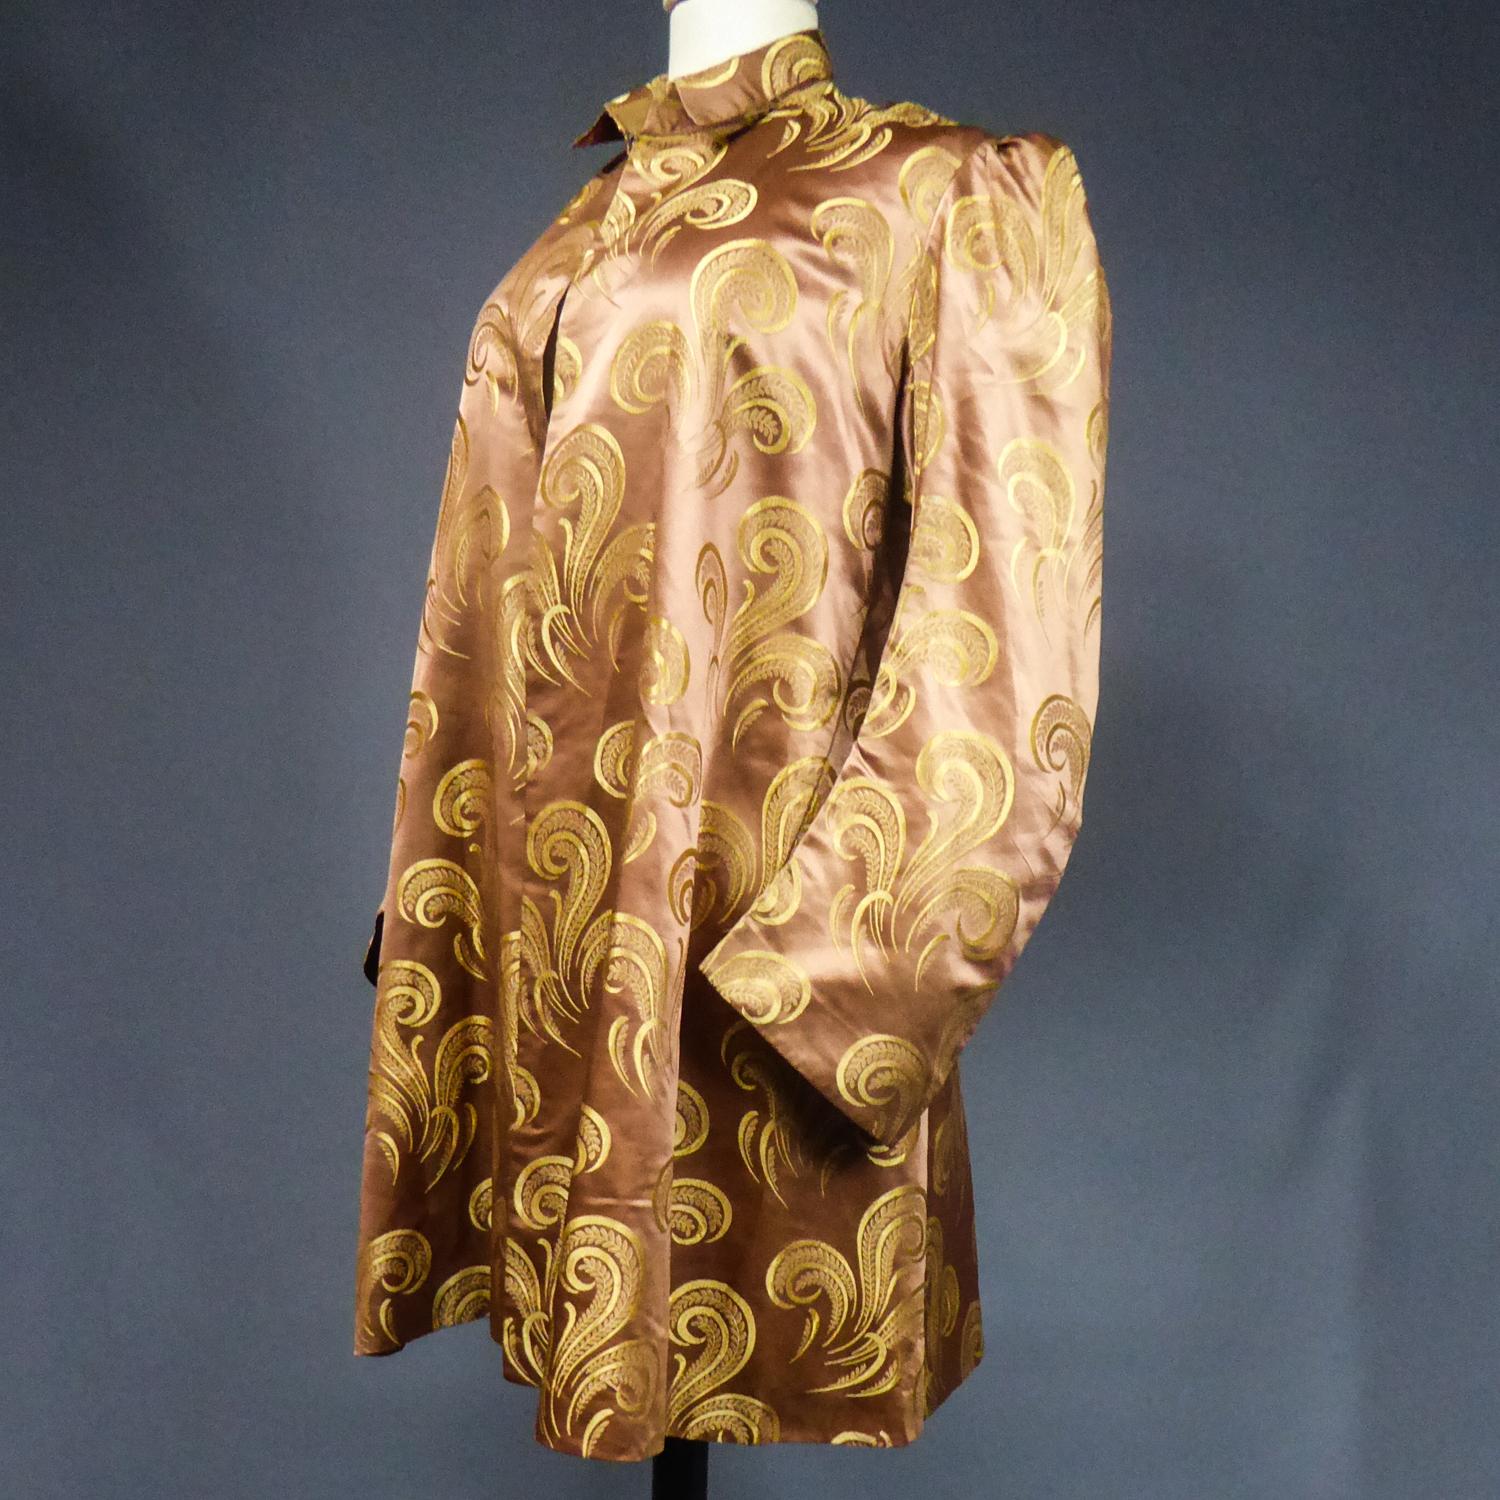 Circa 1930/1950
France

Amazing evening or party jacket inspired by Amazone style, in brown silk satin with gold stylized patterns in volutes, feathers and panaches. This is a reuse of an older dress because the Brocaded satin silk is to date